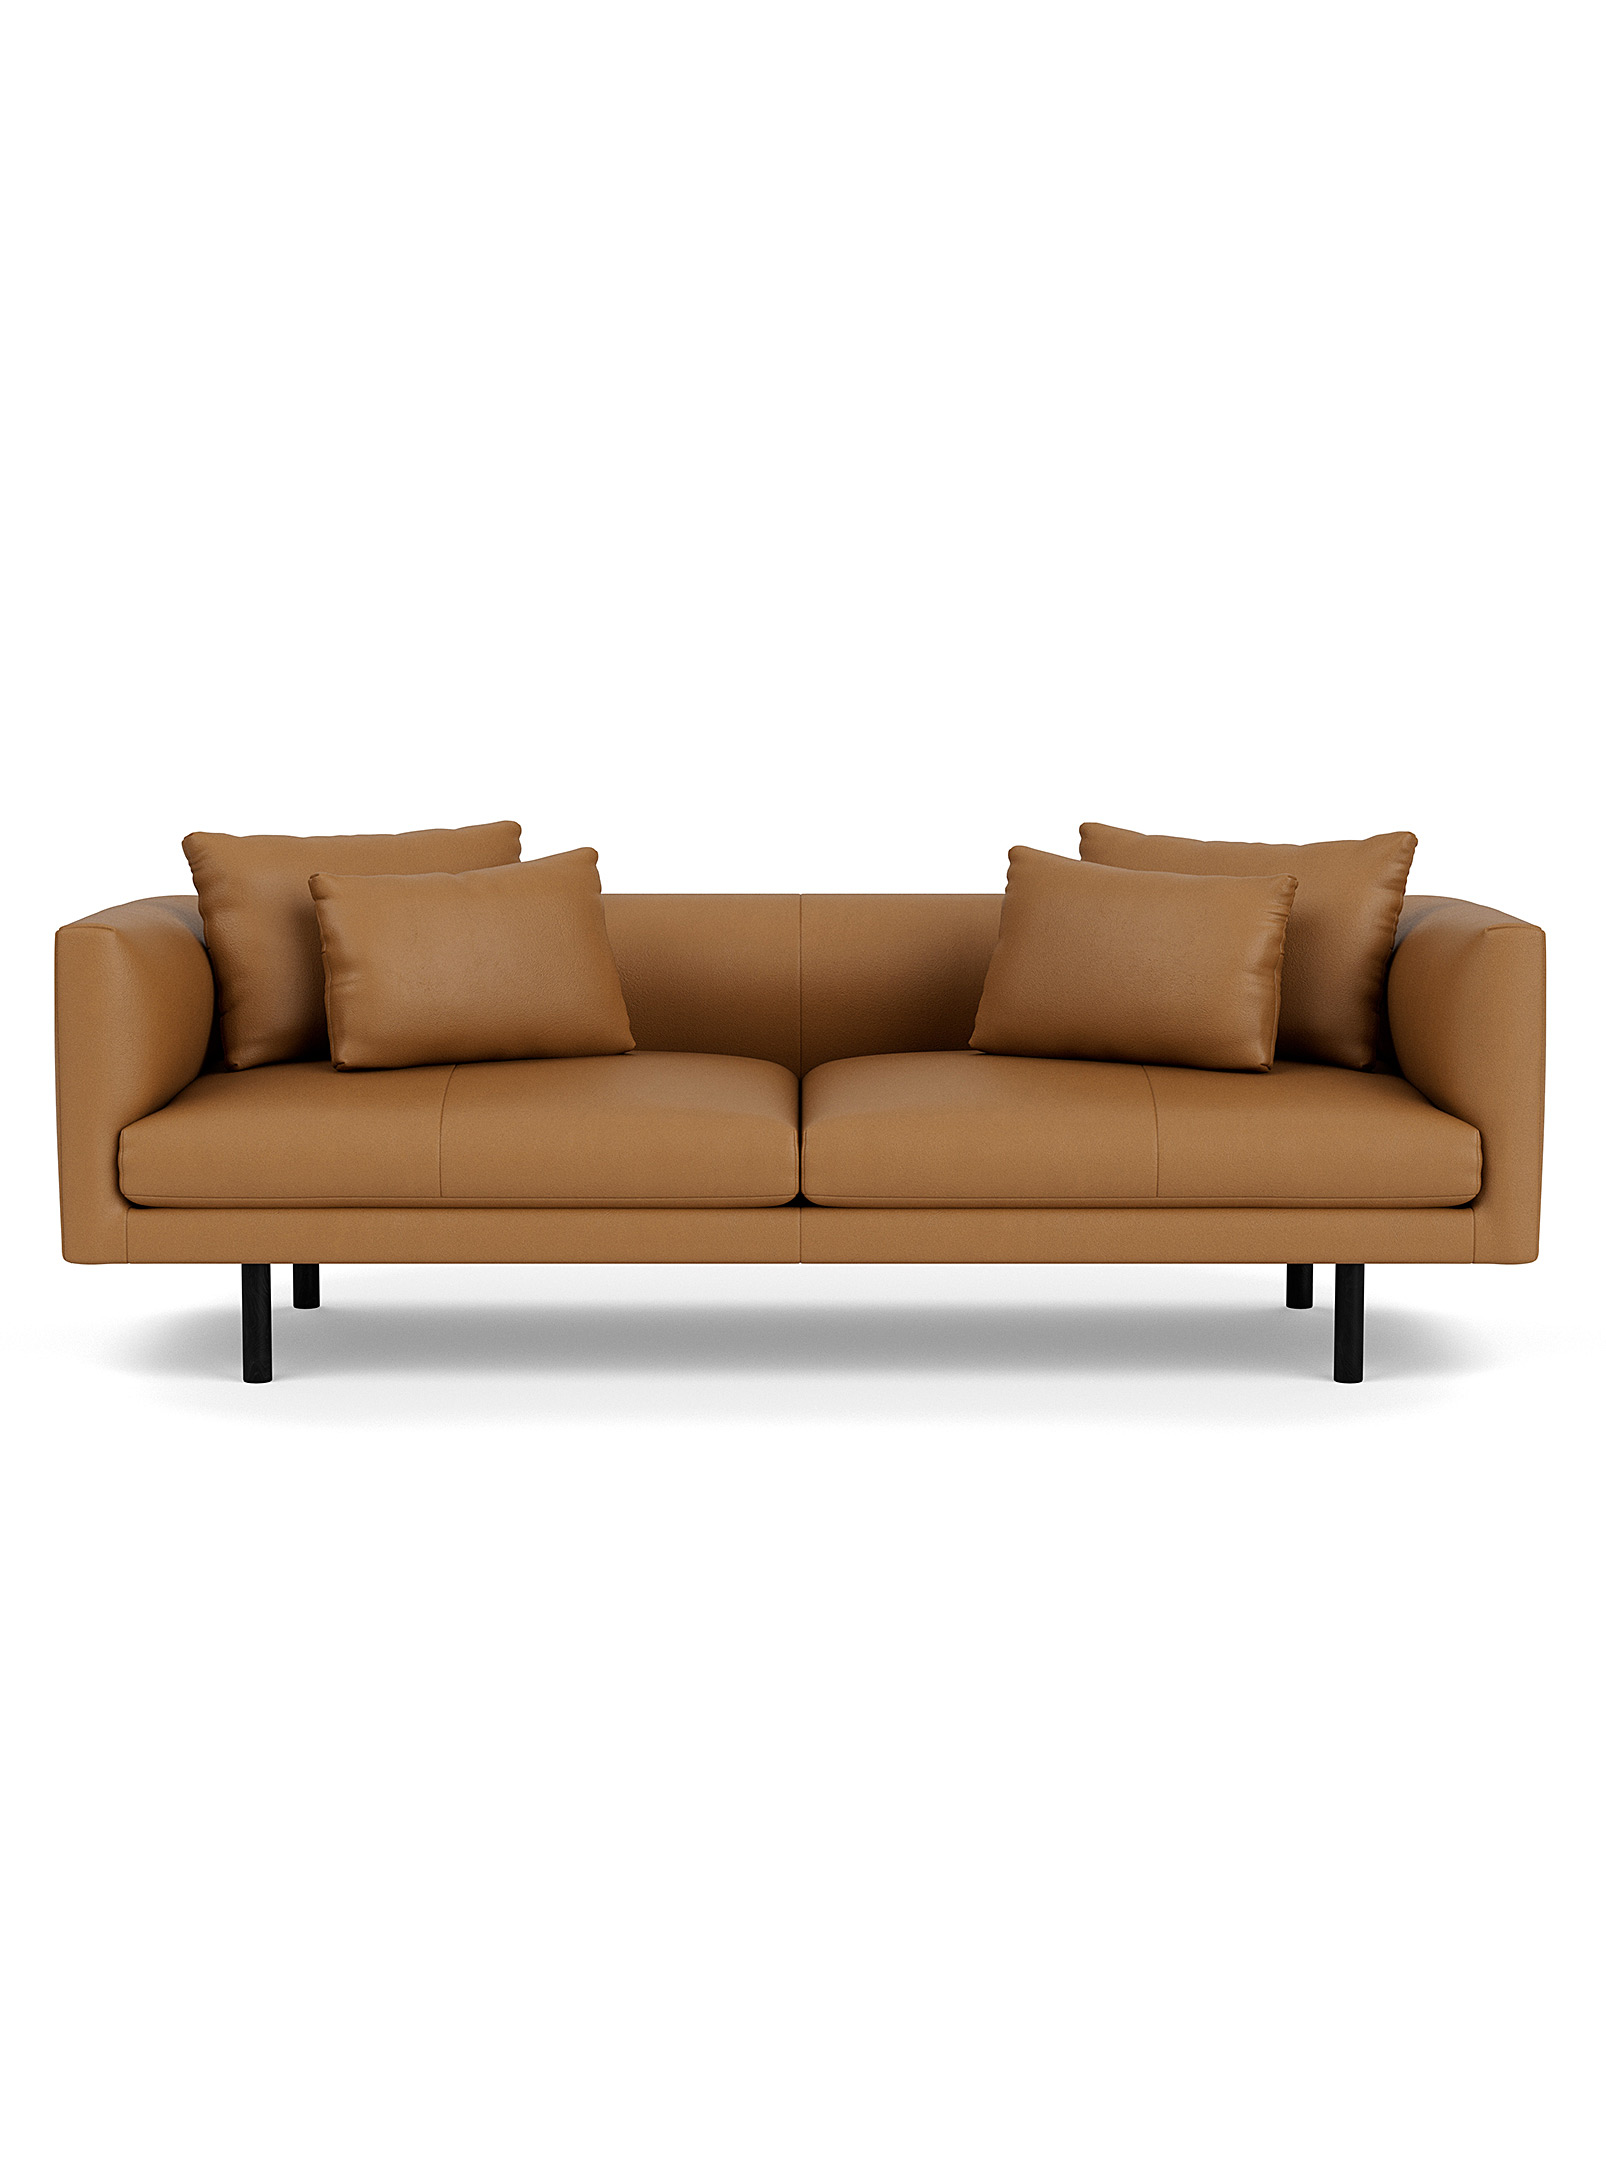 EQ3 - Replay leather couch